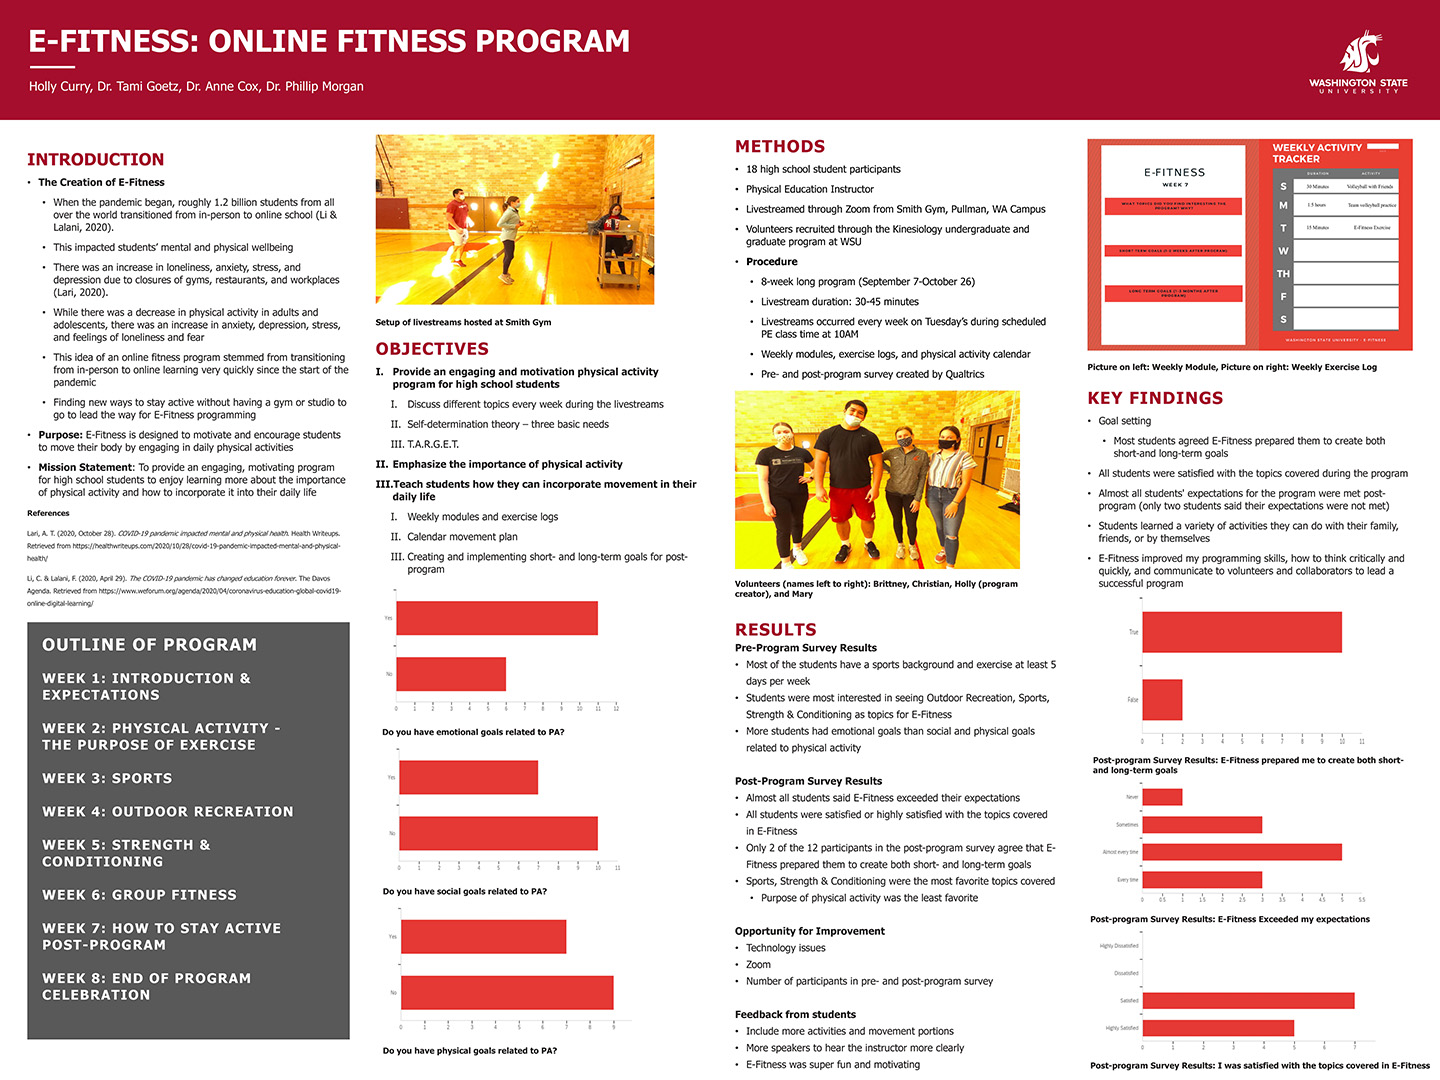 WSU Showcase Poster: E-Fitness: Online Fitness Program; Holly Curry, Dr. Tami Goetz, Dr. Anne Cox, Dr. Phillip Morgan